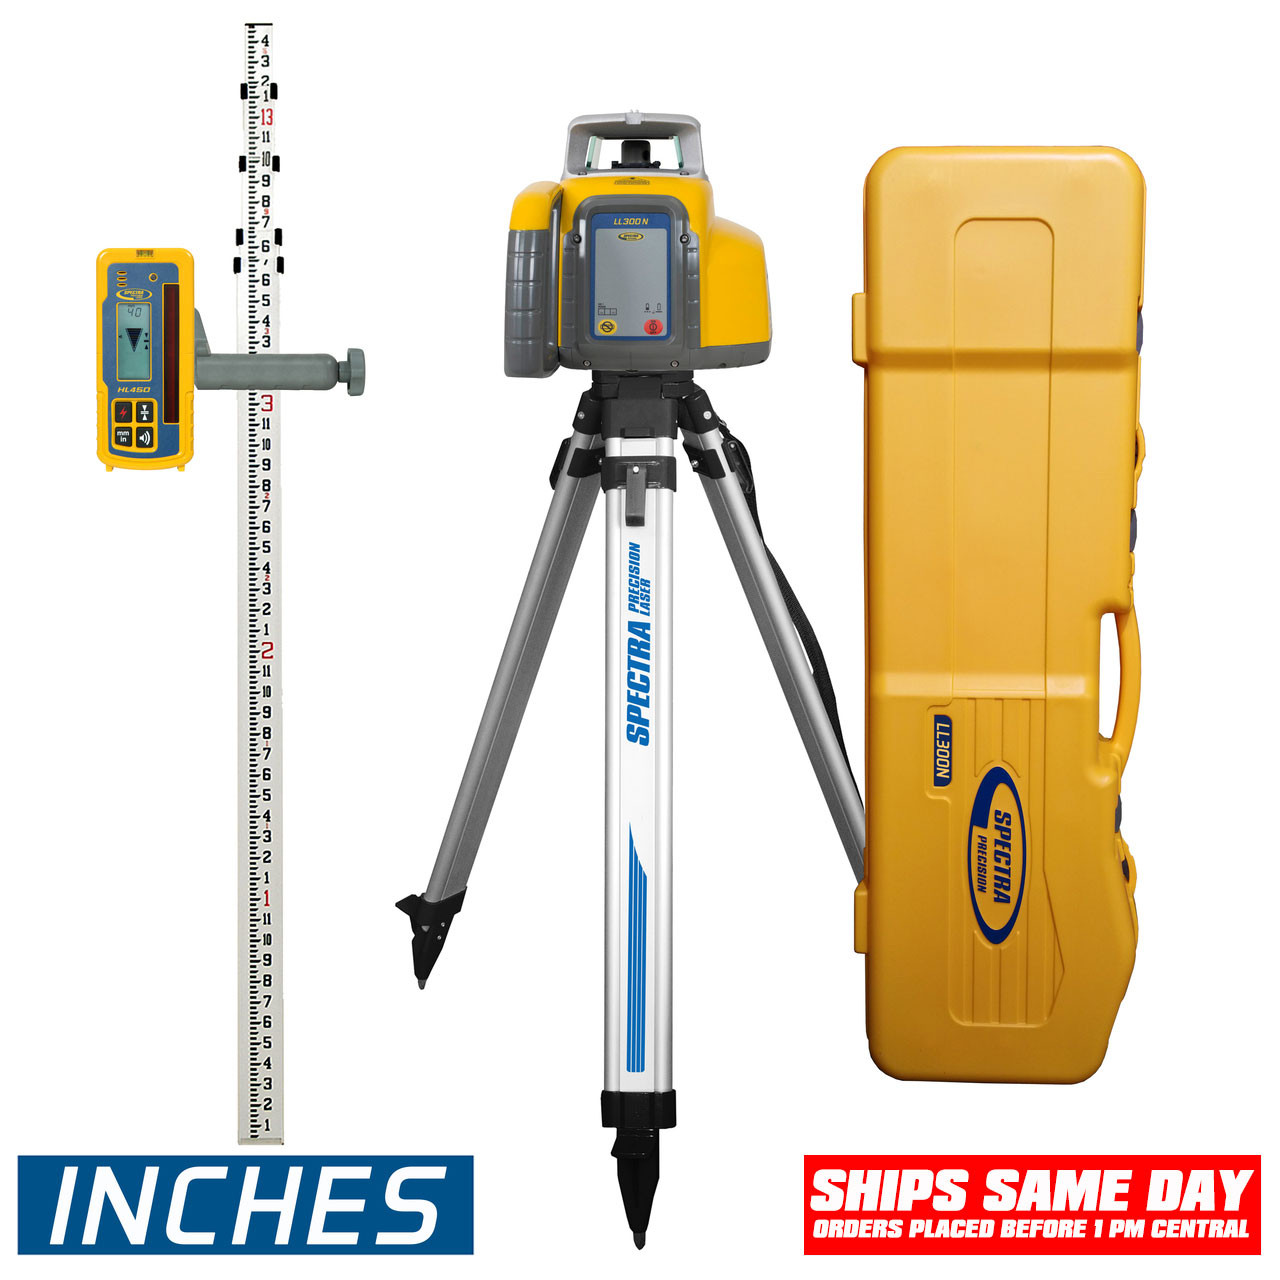 Clamp 15' Grade Rod / Inches and Tripod Spectra Precision LL300N-2 Laser Level Self Leveling Kit with HL450 Receiver 